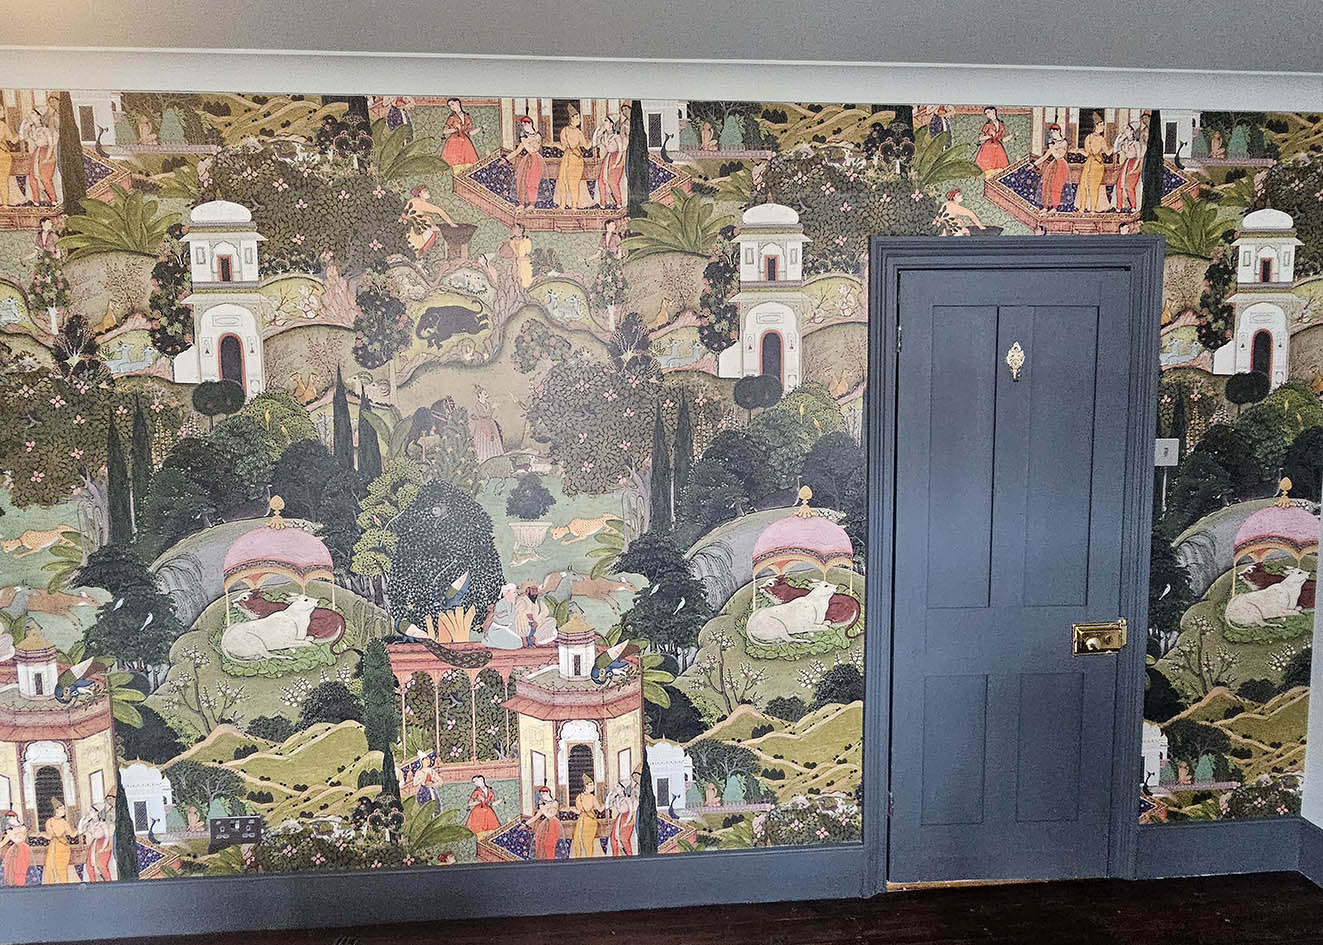 MINDTHEGAP made to measure bright and colourful with trees and buildings Rajasthan style wallpaper installed by Bluespec Decorating wallpaper hangers.